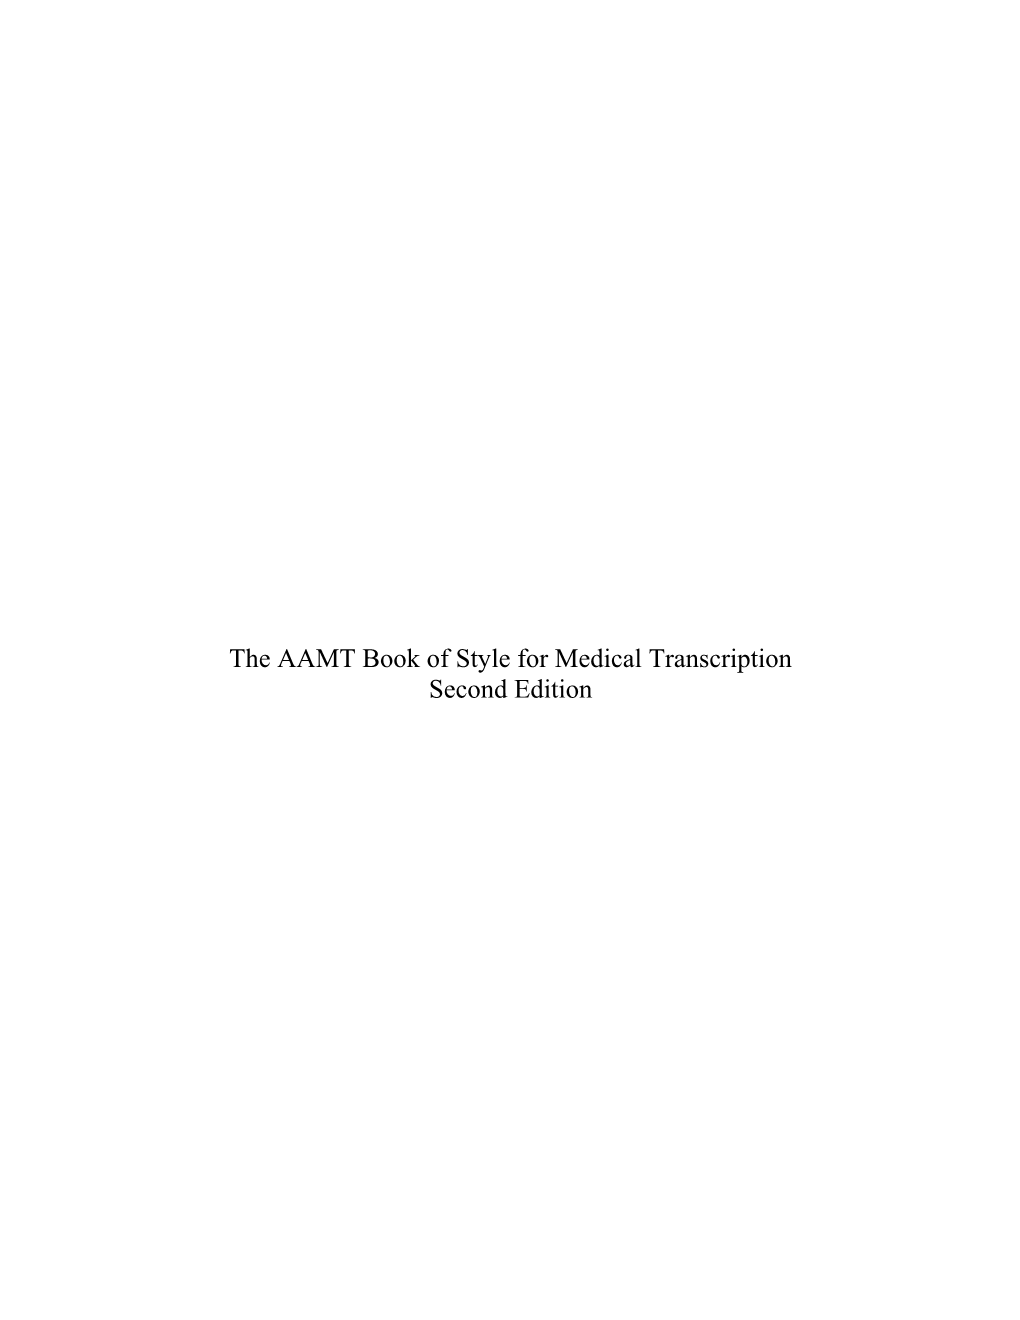 The AAMT Book of Style for Medical Transcription